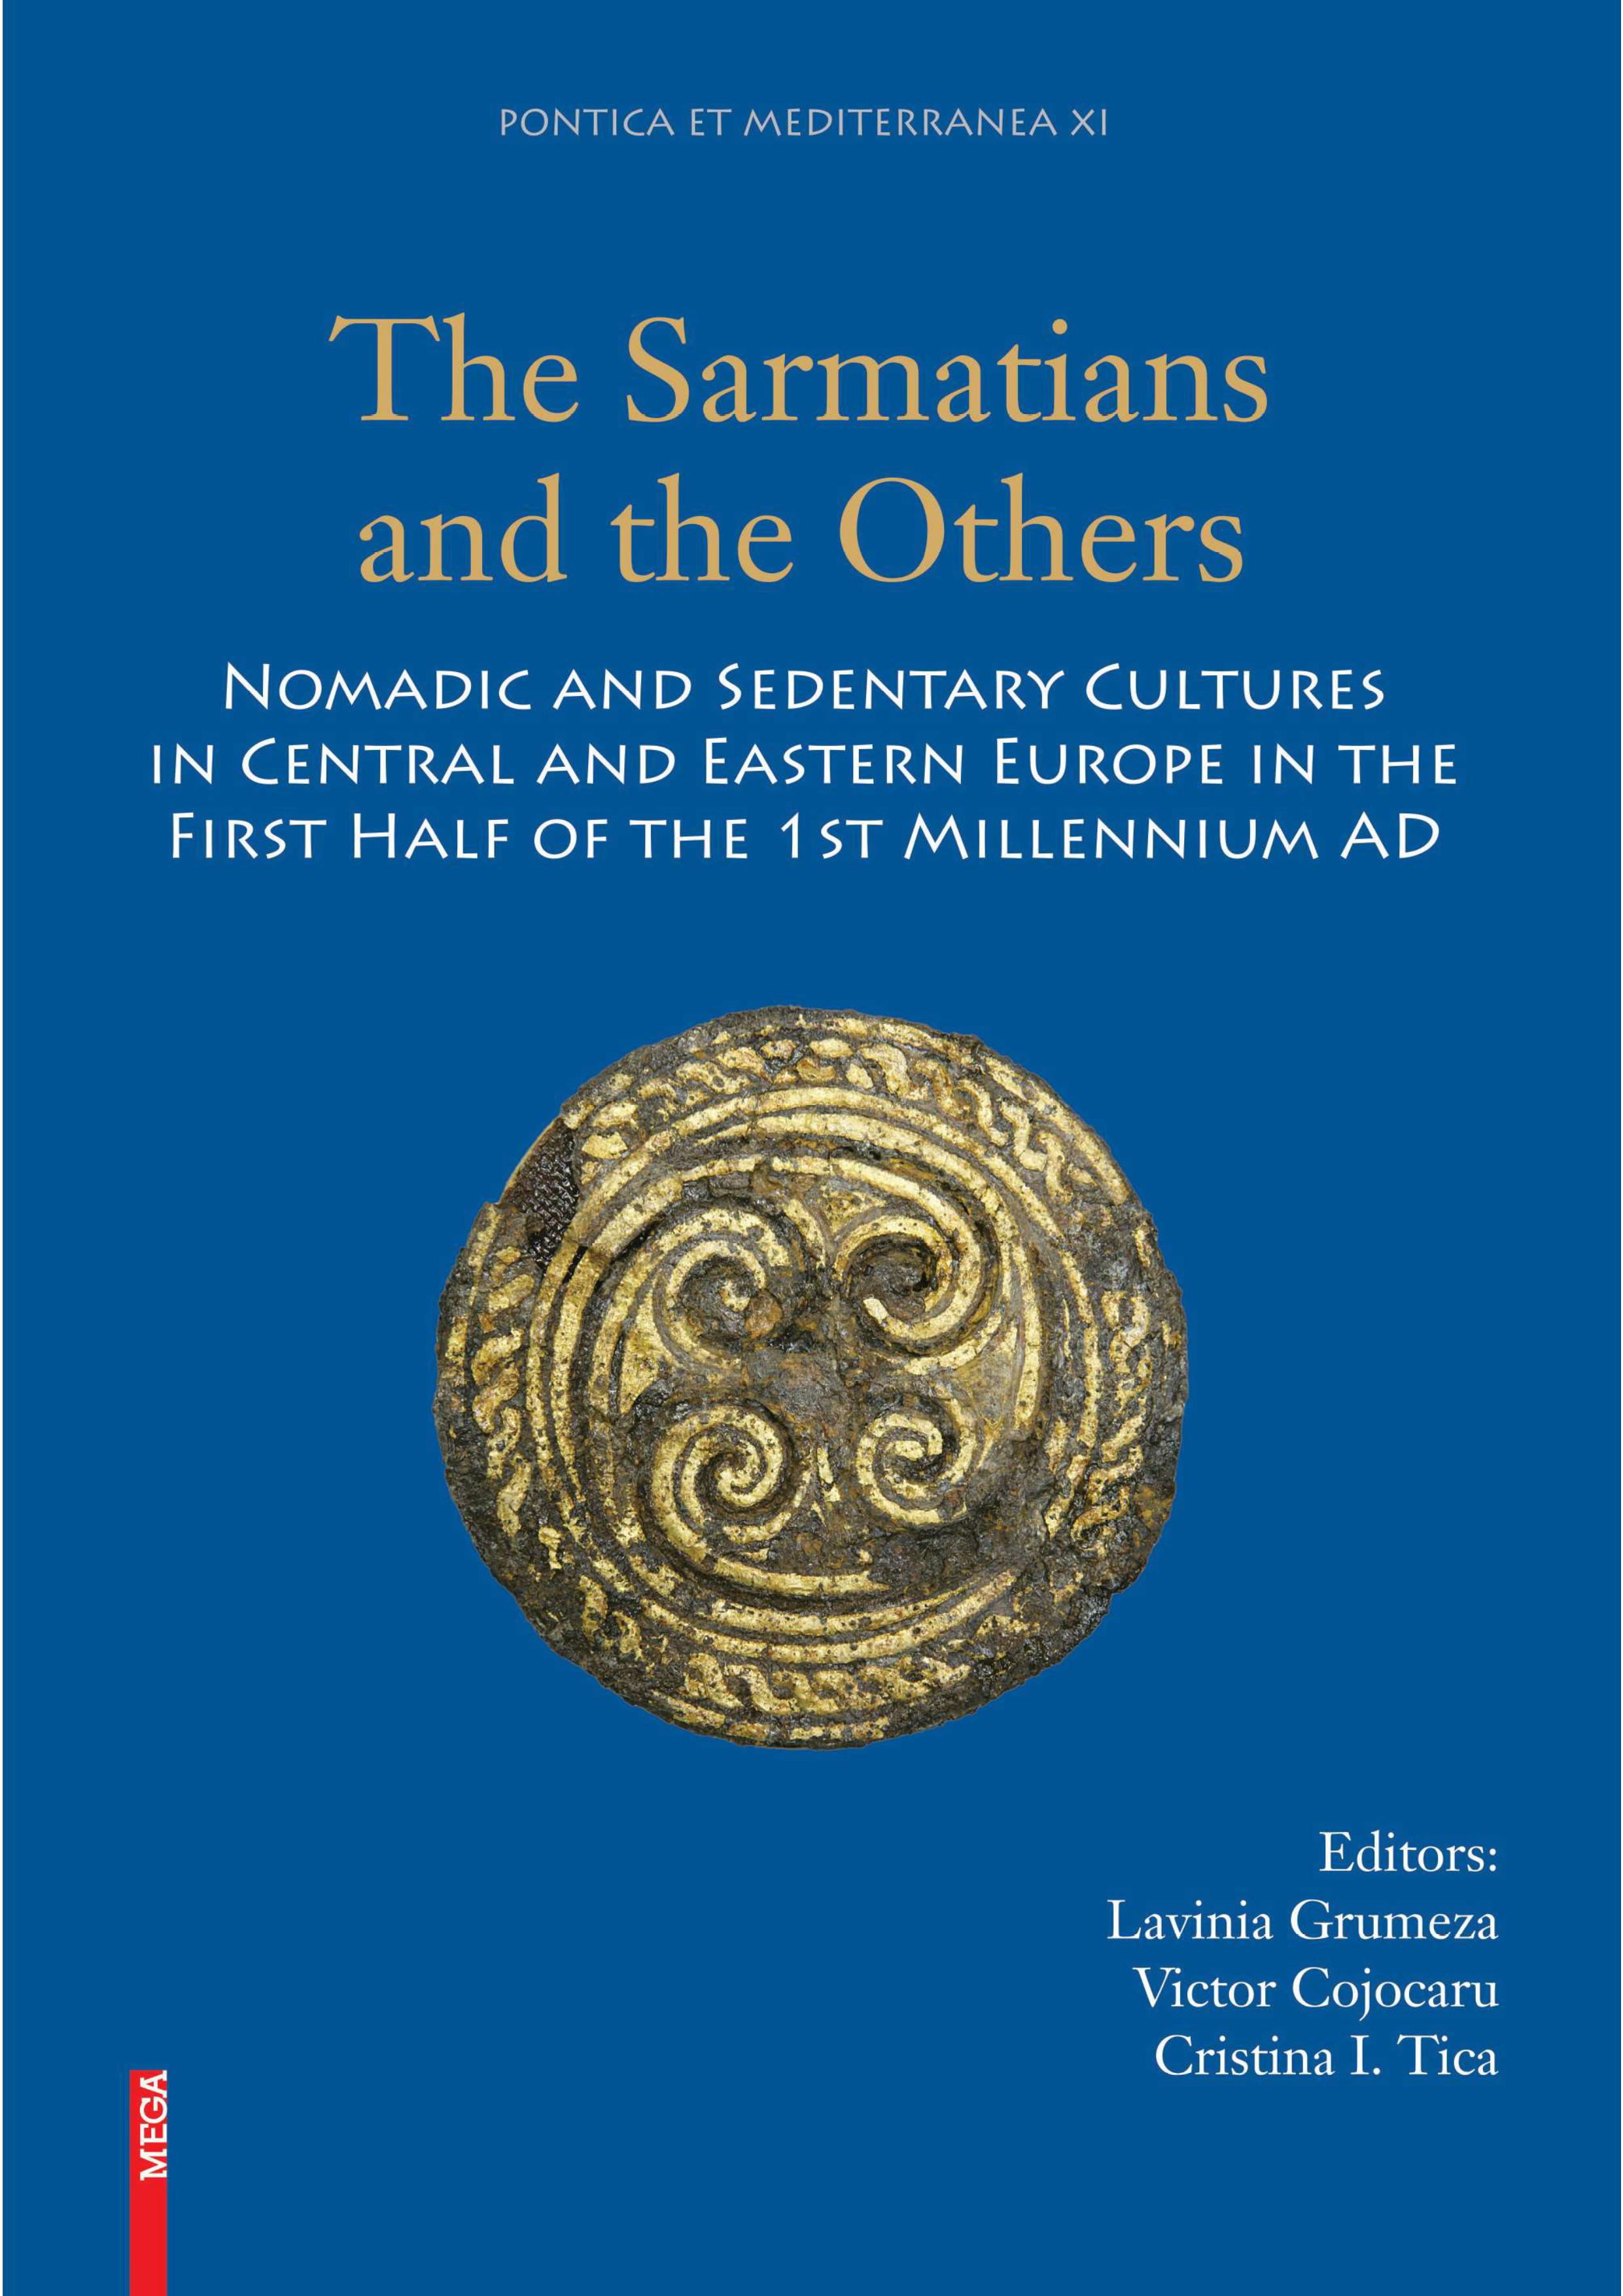 Grumeza, Lavinia  – Victor Cojocaru – Cristina I. Tica : The Sarmatians and the Others. Nomadic and Sedentary Cultures in Central and Eastern Europe in the First Half of the 1st Millennium AD